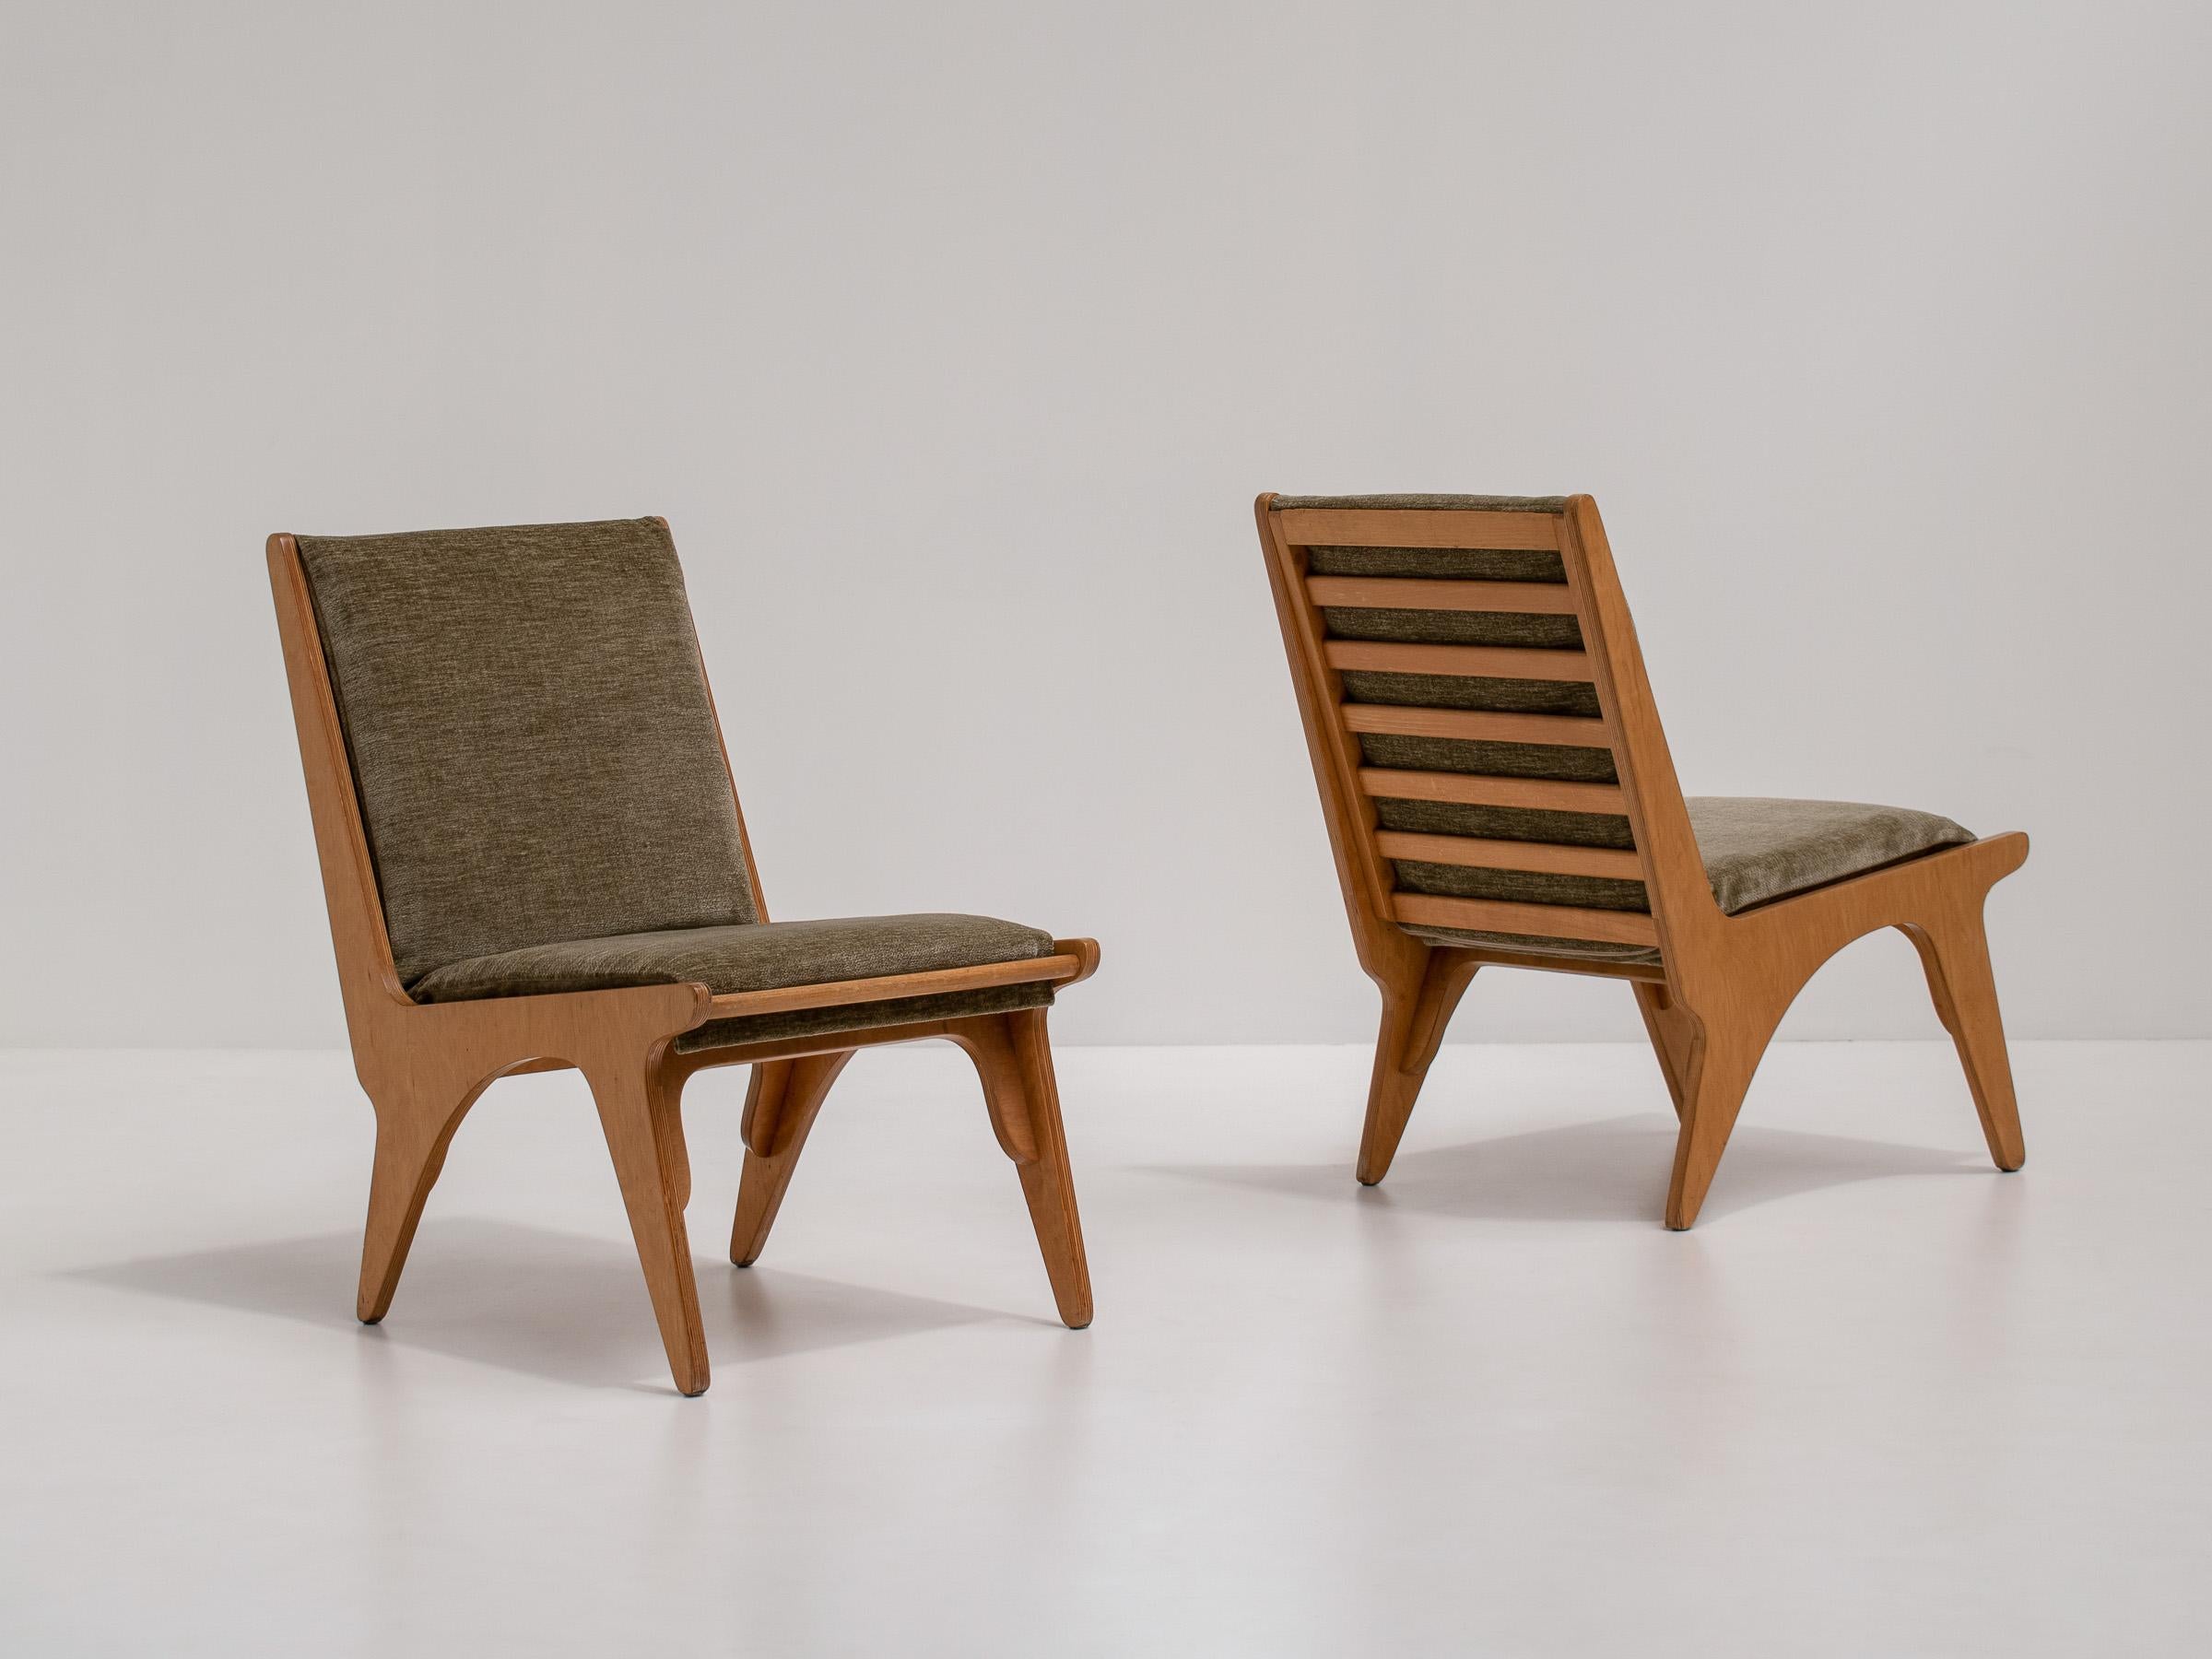 Dordrecht Chairs by Wim van Gelderen for 't Spectrum, the Netherlands.

Naive, modernist, vintage armchairs in a light-colored oak. They pair beautifully with the 